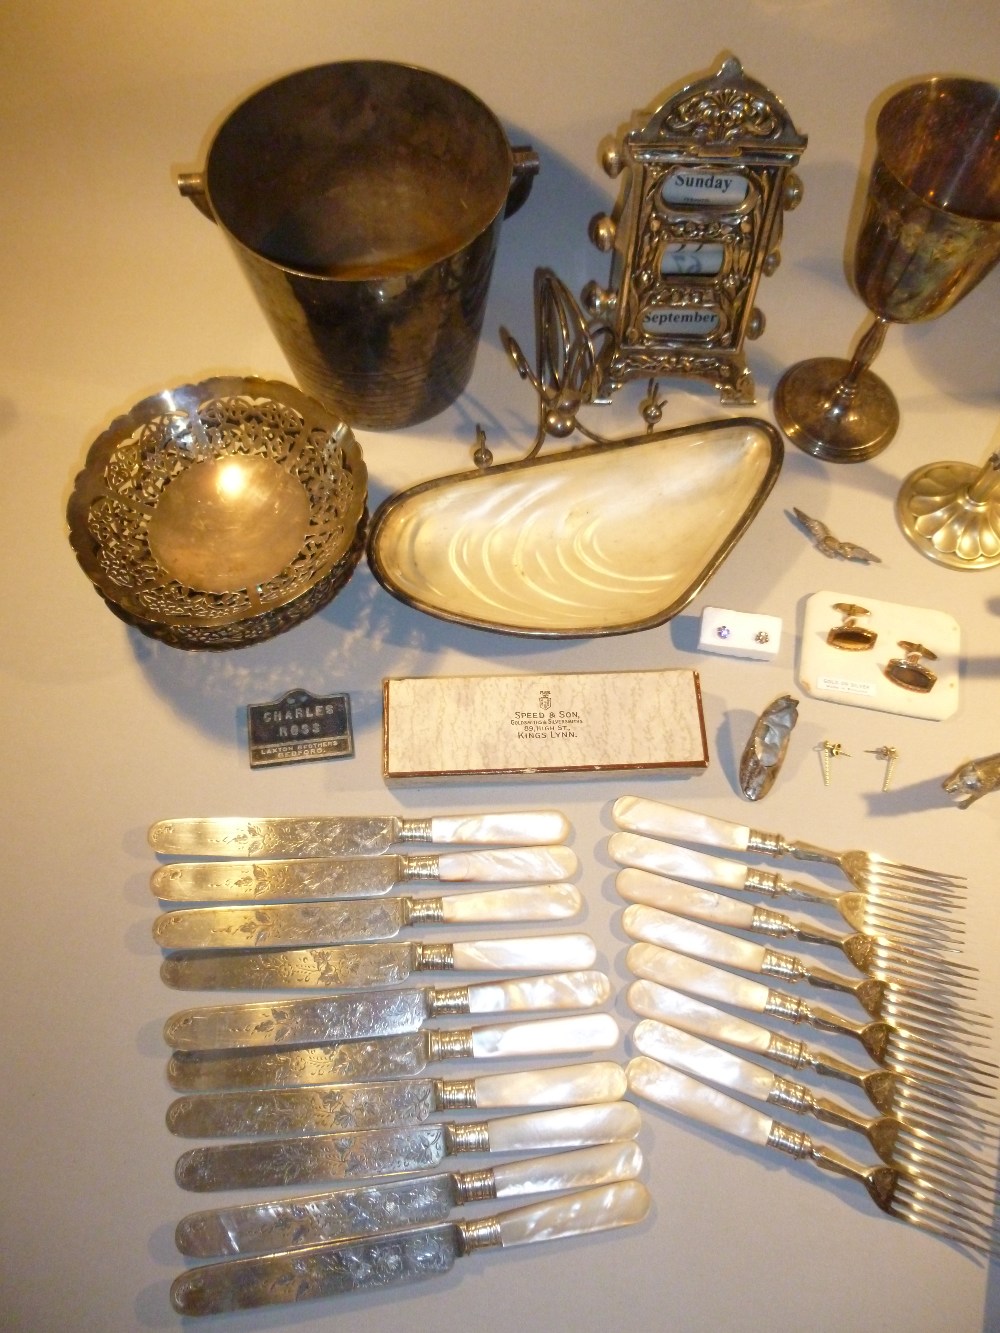 SILVER PLATED OYSTER DISH AND OTHER PLATED ITEMS. ALSO A DESK CALENDAR, DESK ORNAMENT OF A CANON - Image 2 of 8